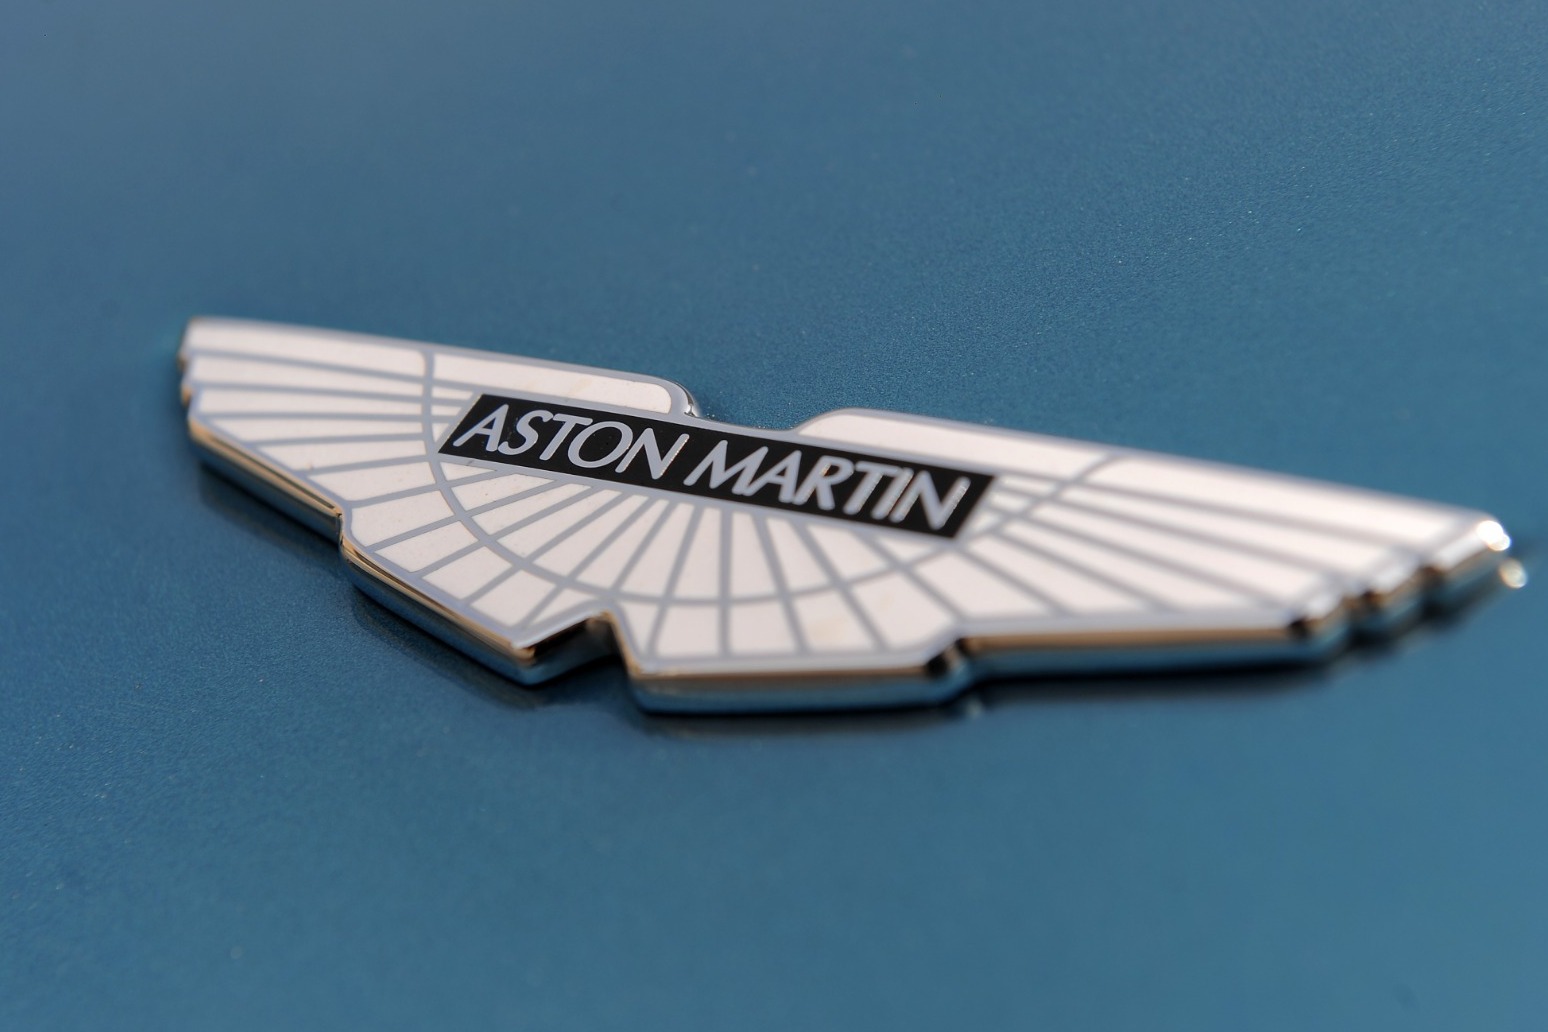 Aston Martin launches £575m rights issue backed by Saudi Arabia’s PIF 